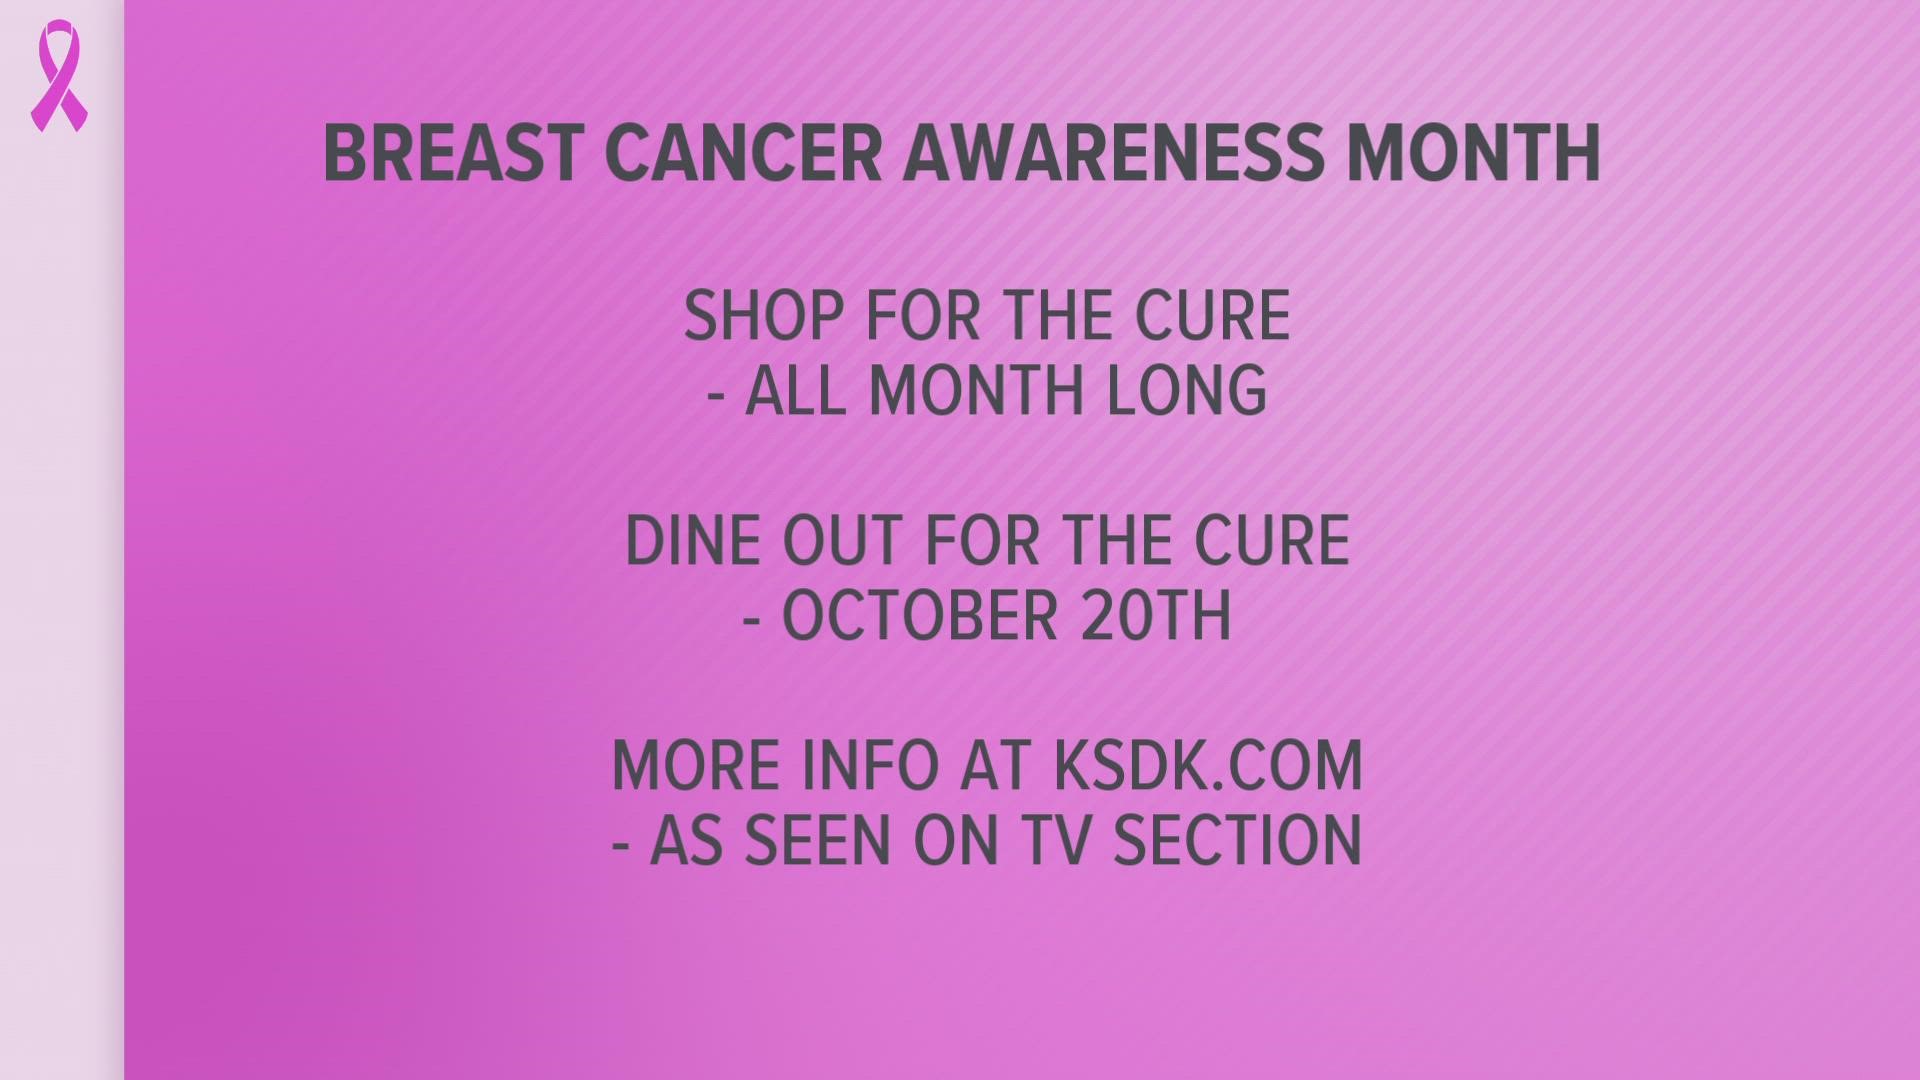 Komen Missouri's "Shop for the Cure" and "Dine Out for the Cure" are underway during the month of October.